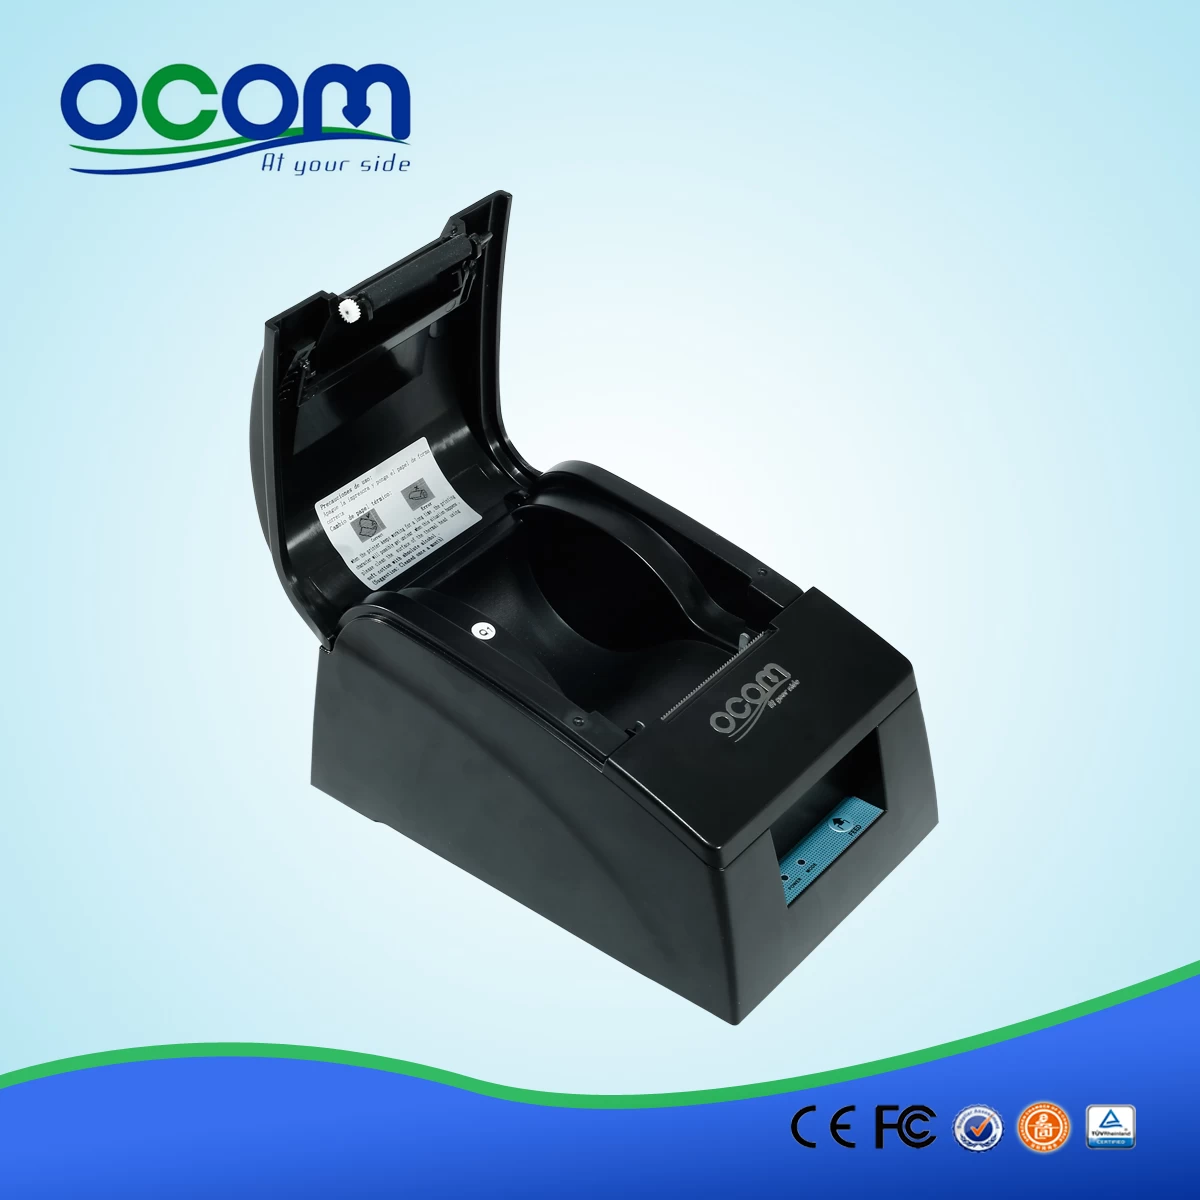 58mm android thermal receipt printer-- OCPP-586